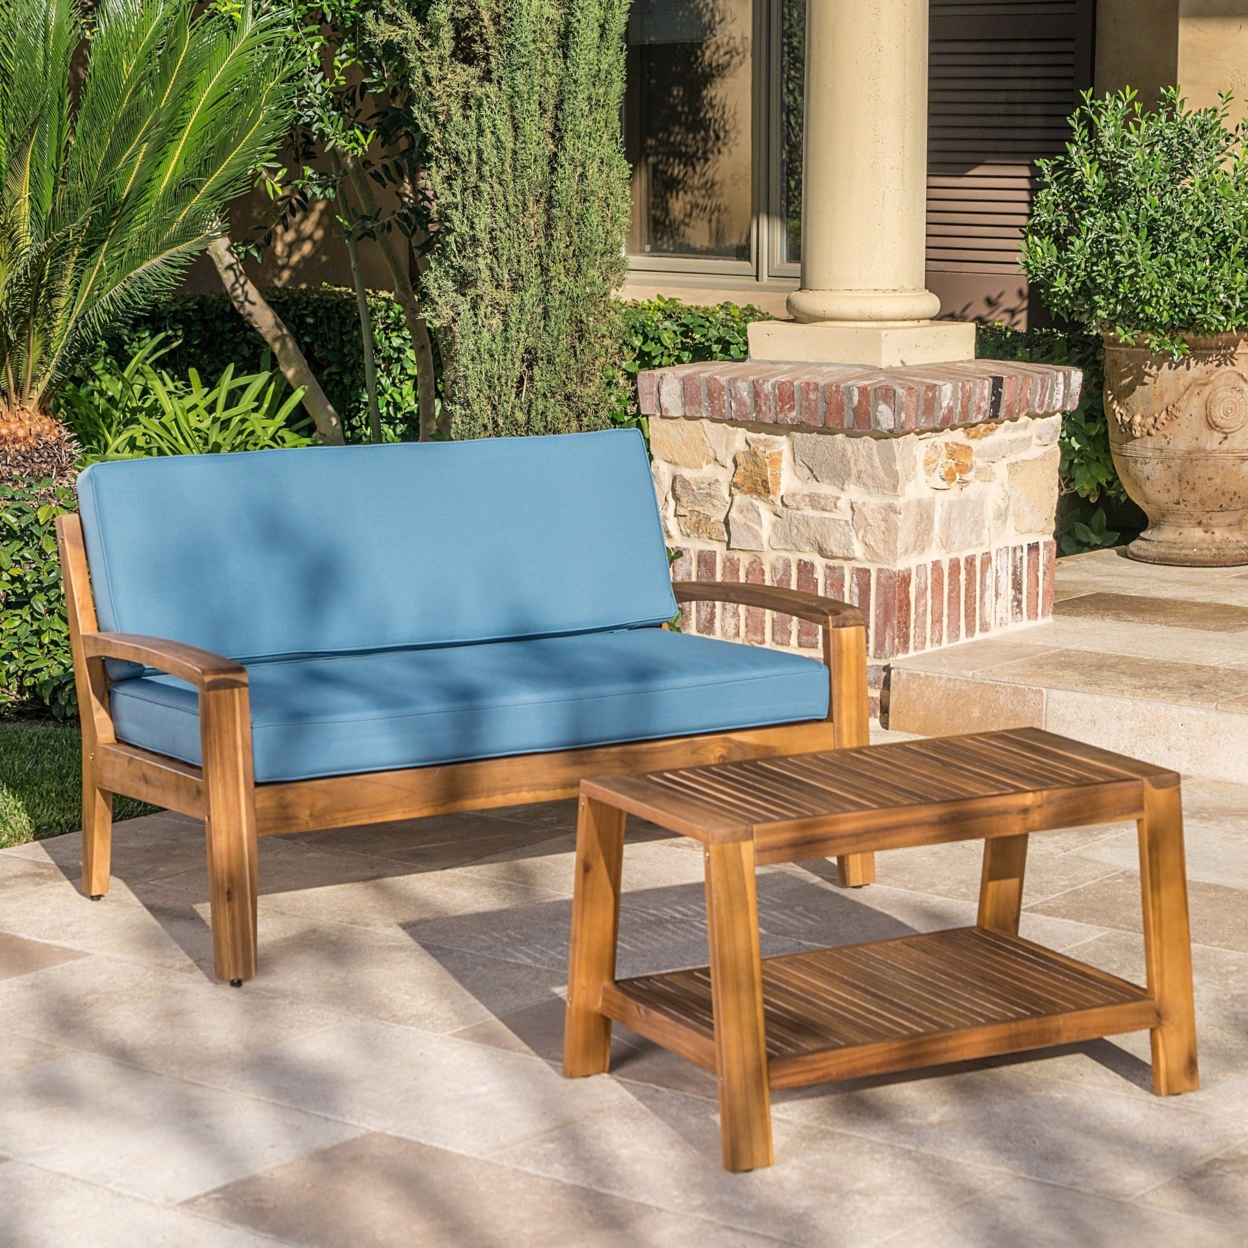 Christian Outdoor Acacia Wood Loveseat And Coffee Table Set With Cushions - Teak Finish/blue